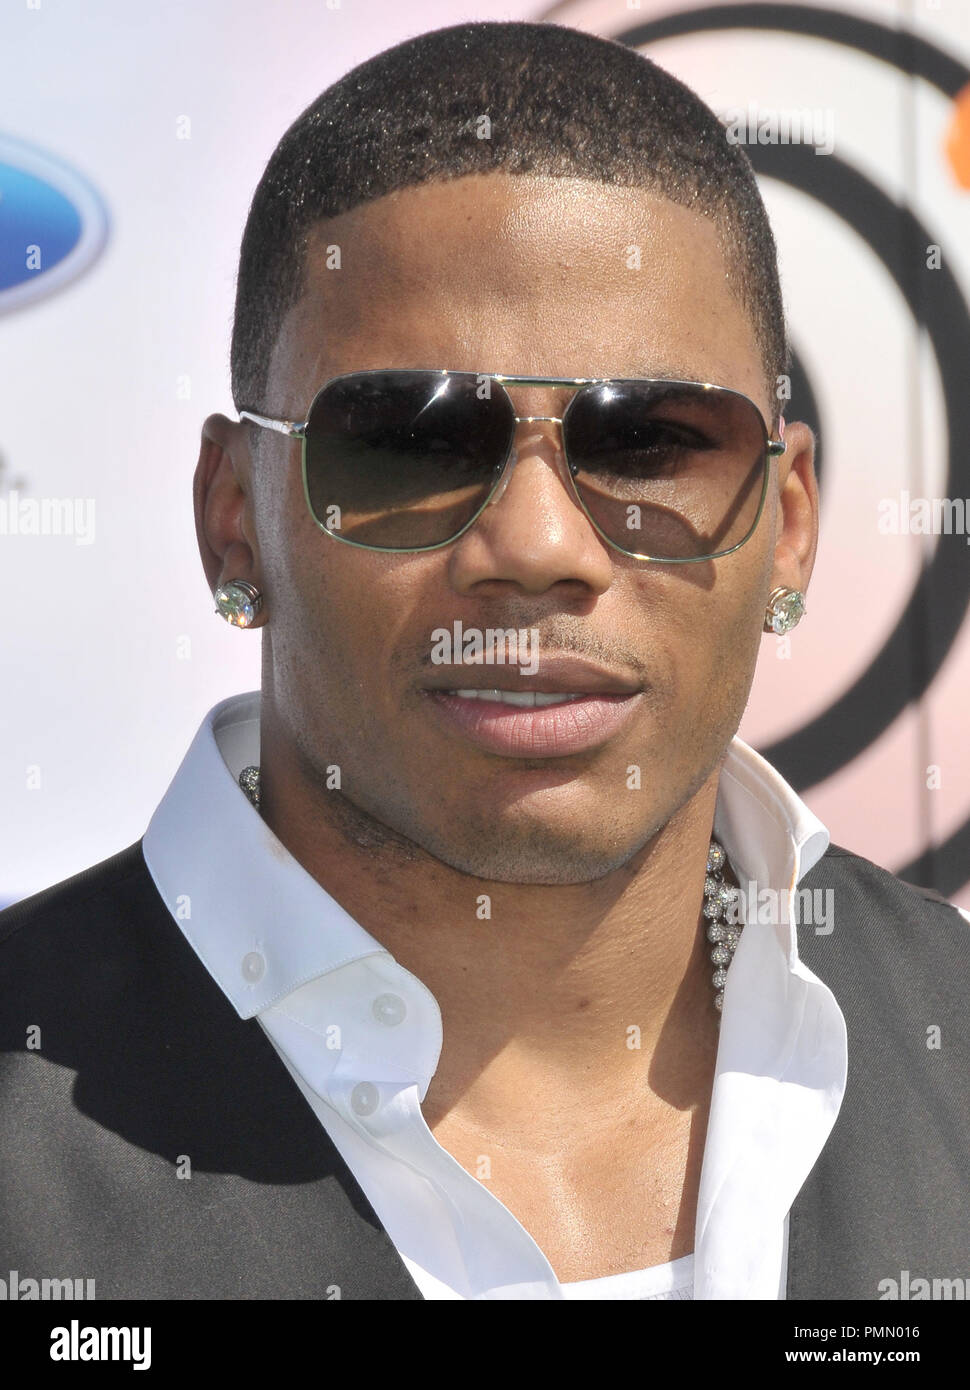 Nelly at the BET Awards' 11 - Arrivals held at The Shrine Auditorium in Los Angeles, CA. The event took place on Sunday, June 26, 2011. Photo by PRPP Pacific Rim Photo Press/ PictureLux Stock Photo